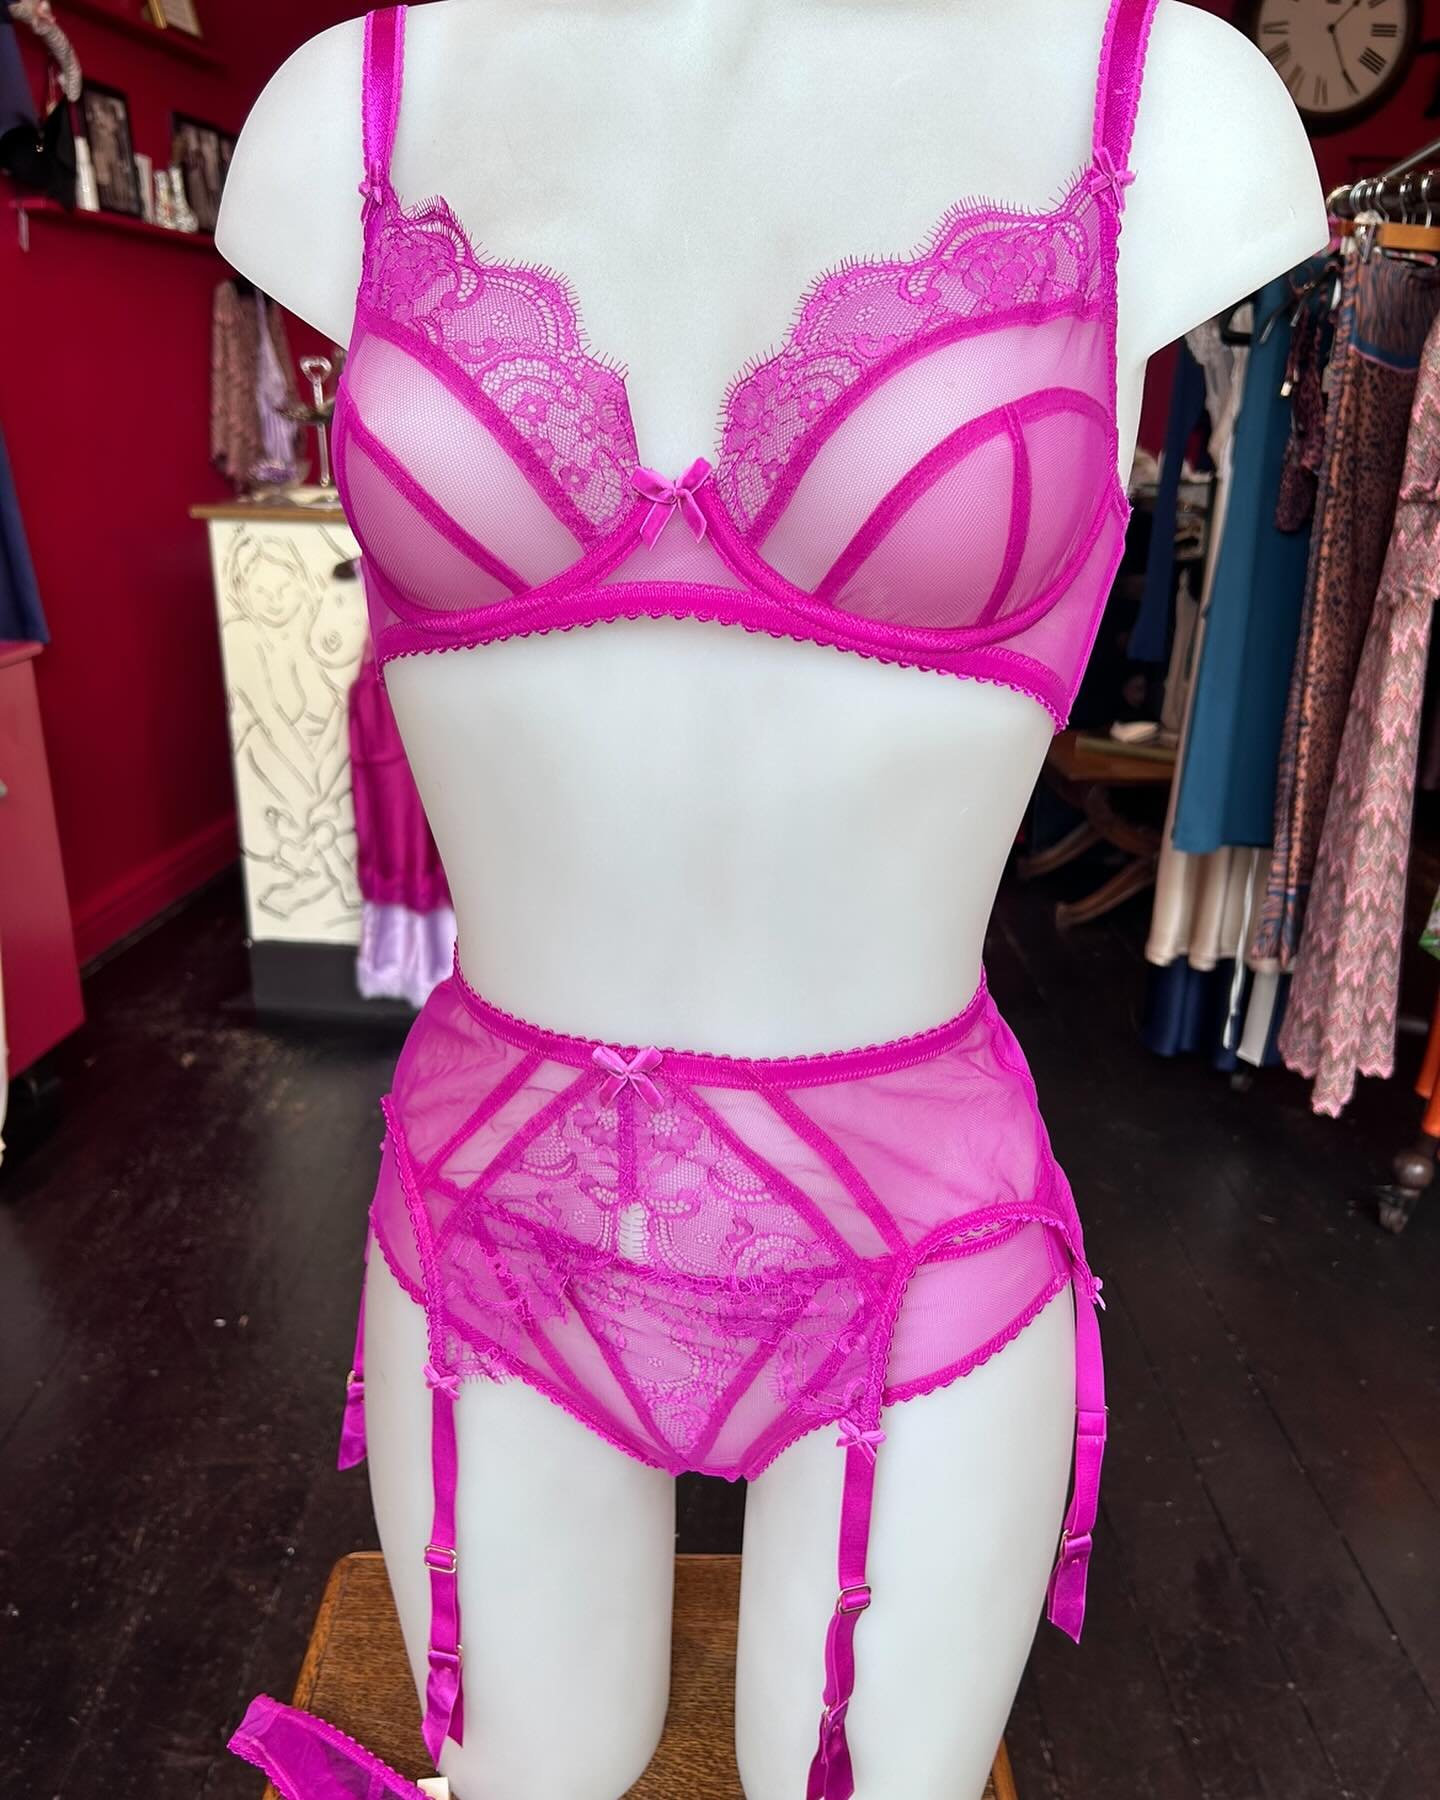 Thought I better pop the magical magenta back up on the grid - no skin showing ! 
DM for details on this fabulous story that includes tulle and lace trimmed sheer bra, knickers, thong and six strap suspender belt with matching silk and lace trimmed c